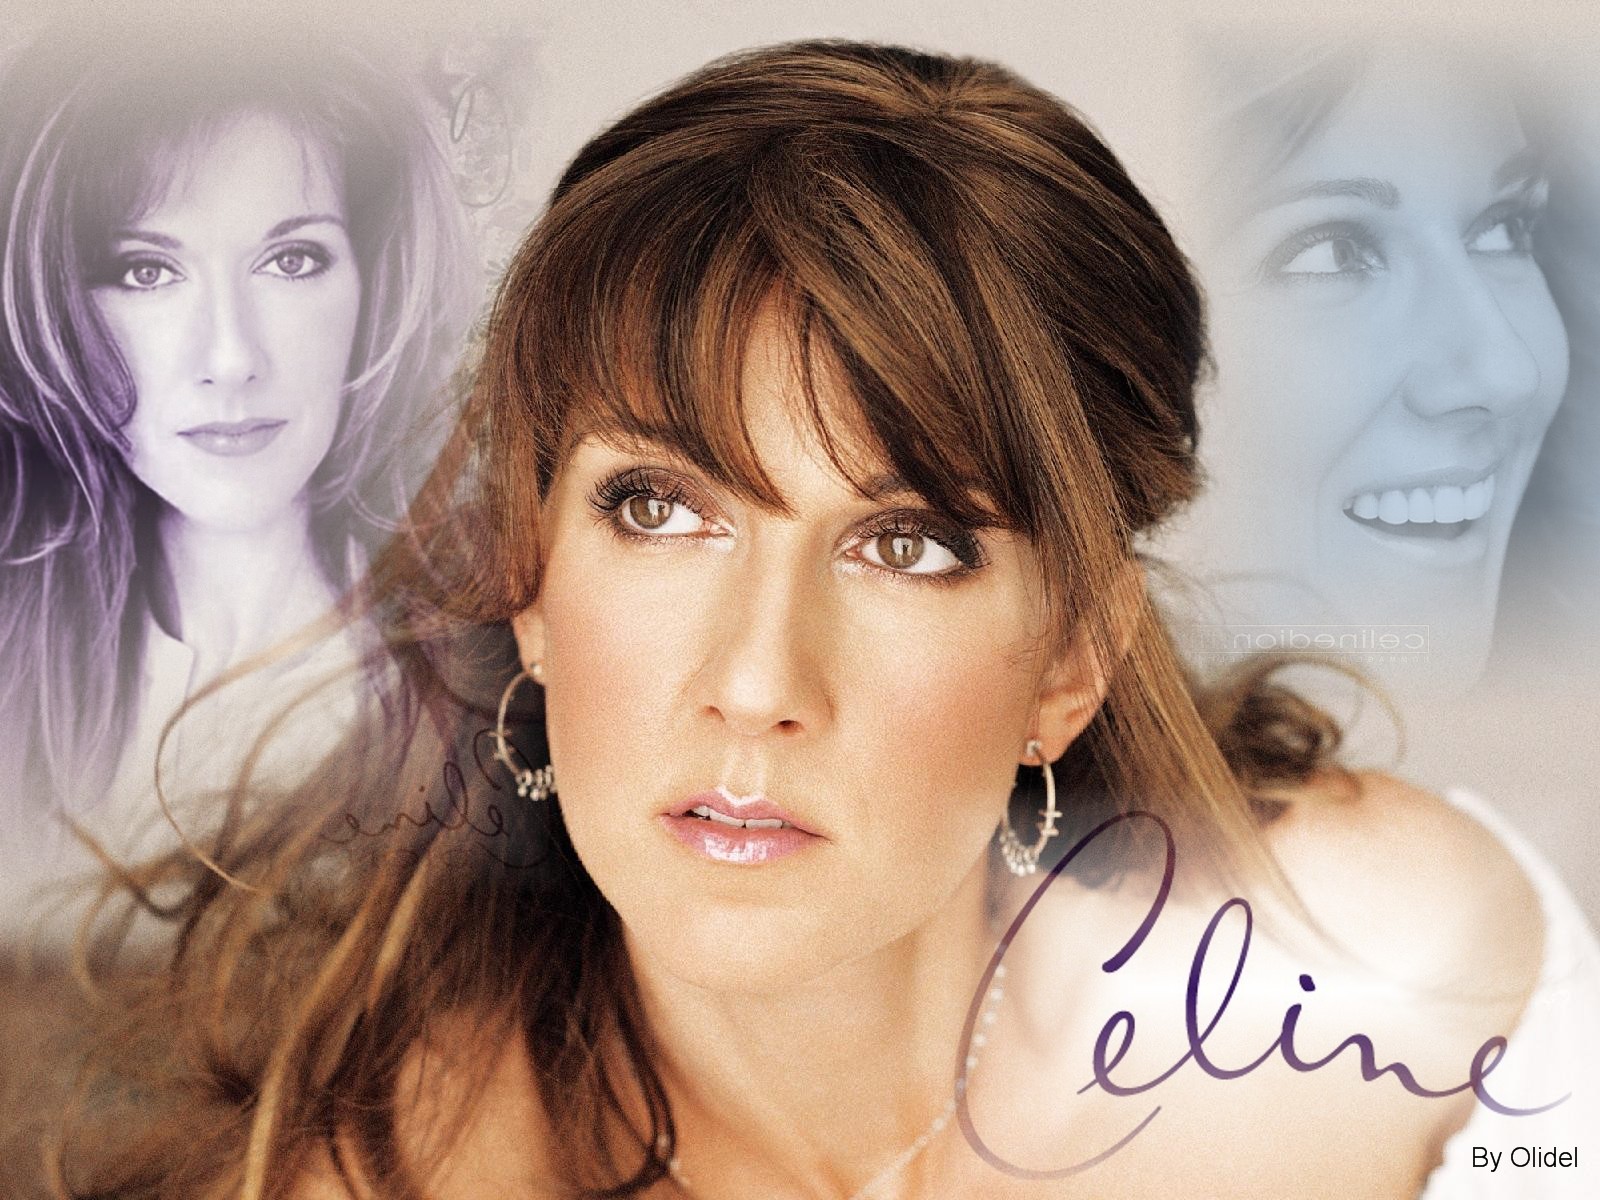 http://www.canadiancontent.net/images/people/picture/Celine-Dion.jpg